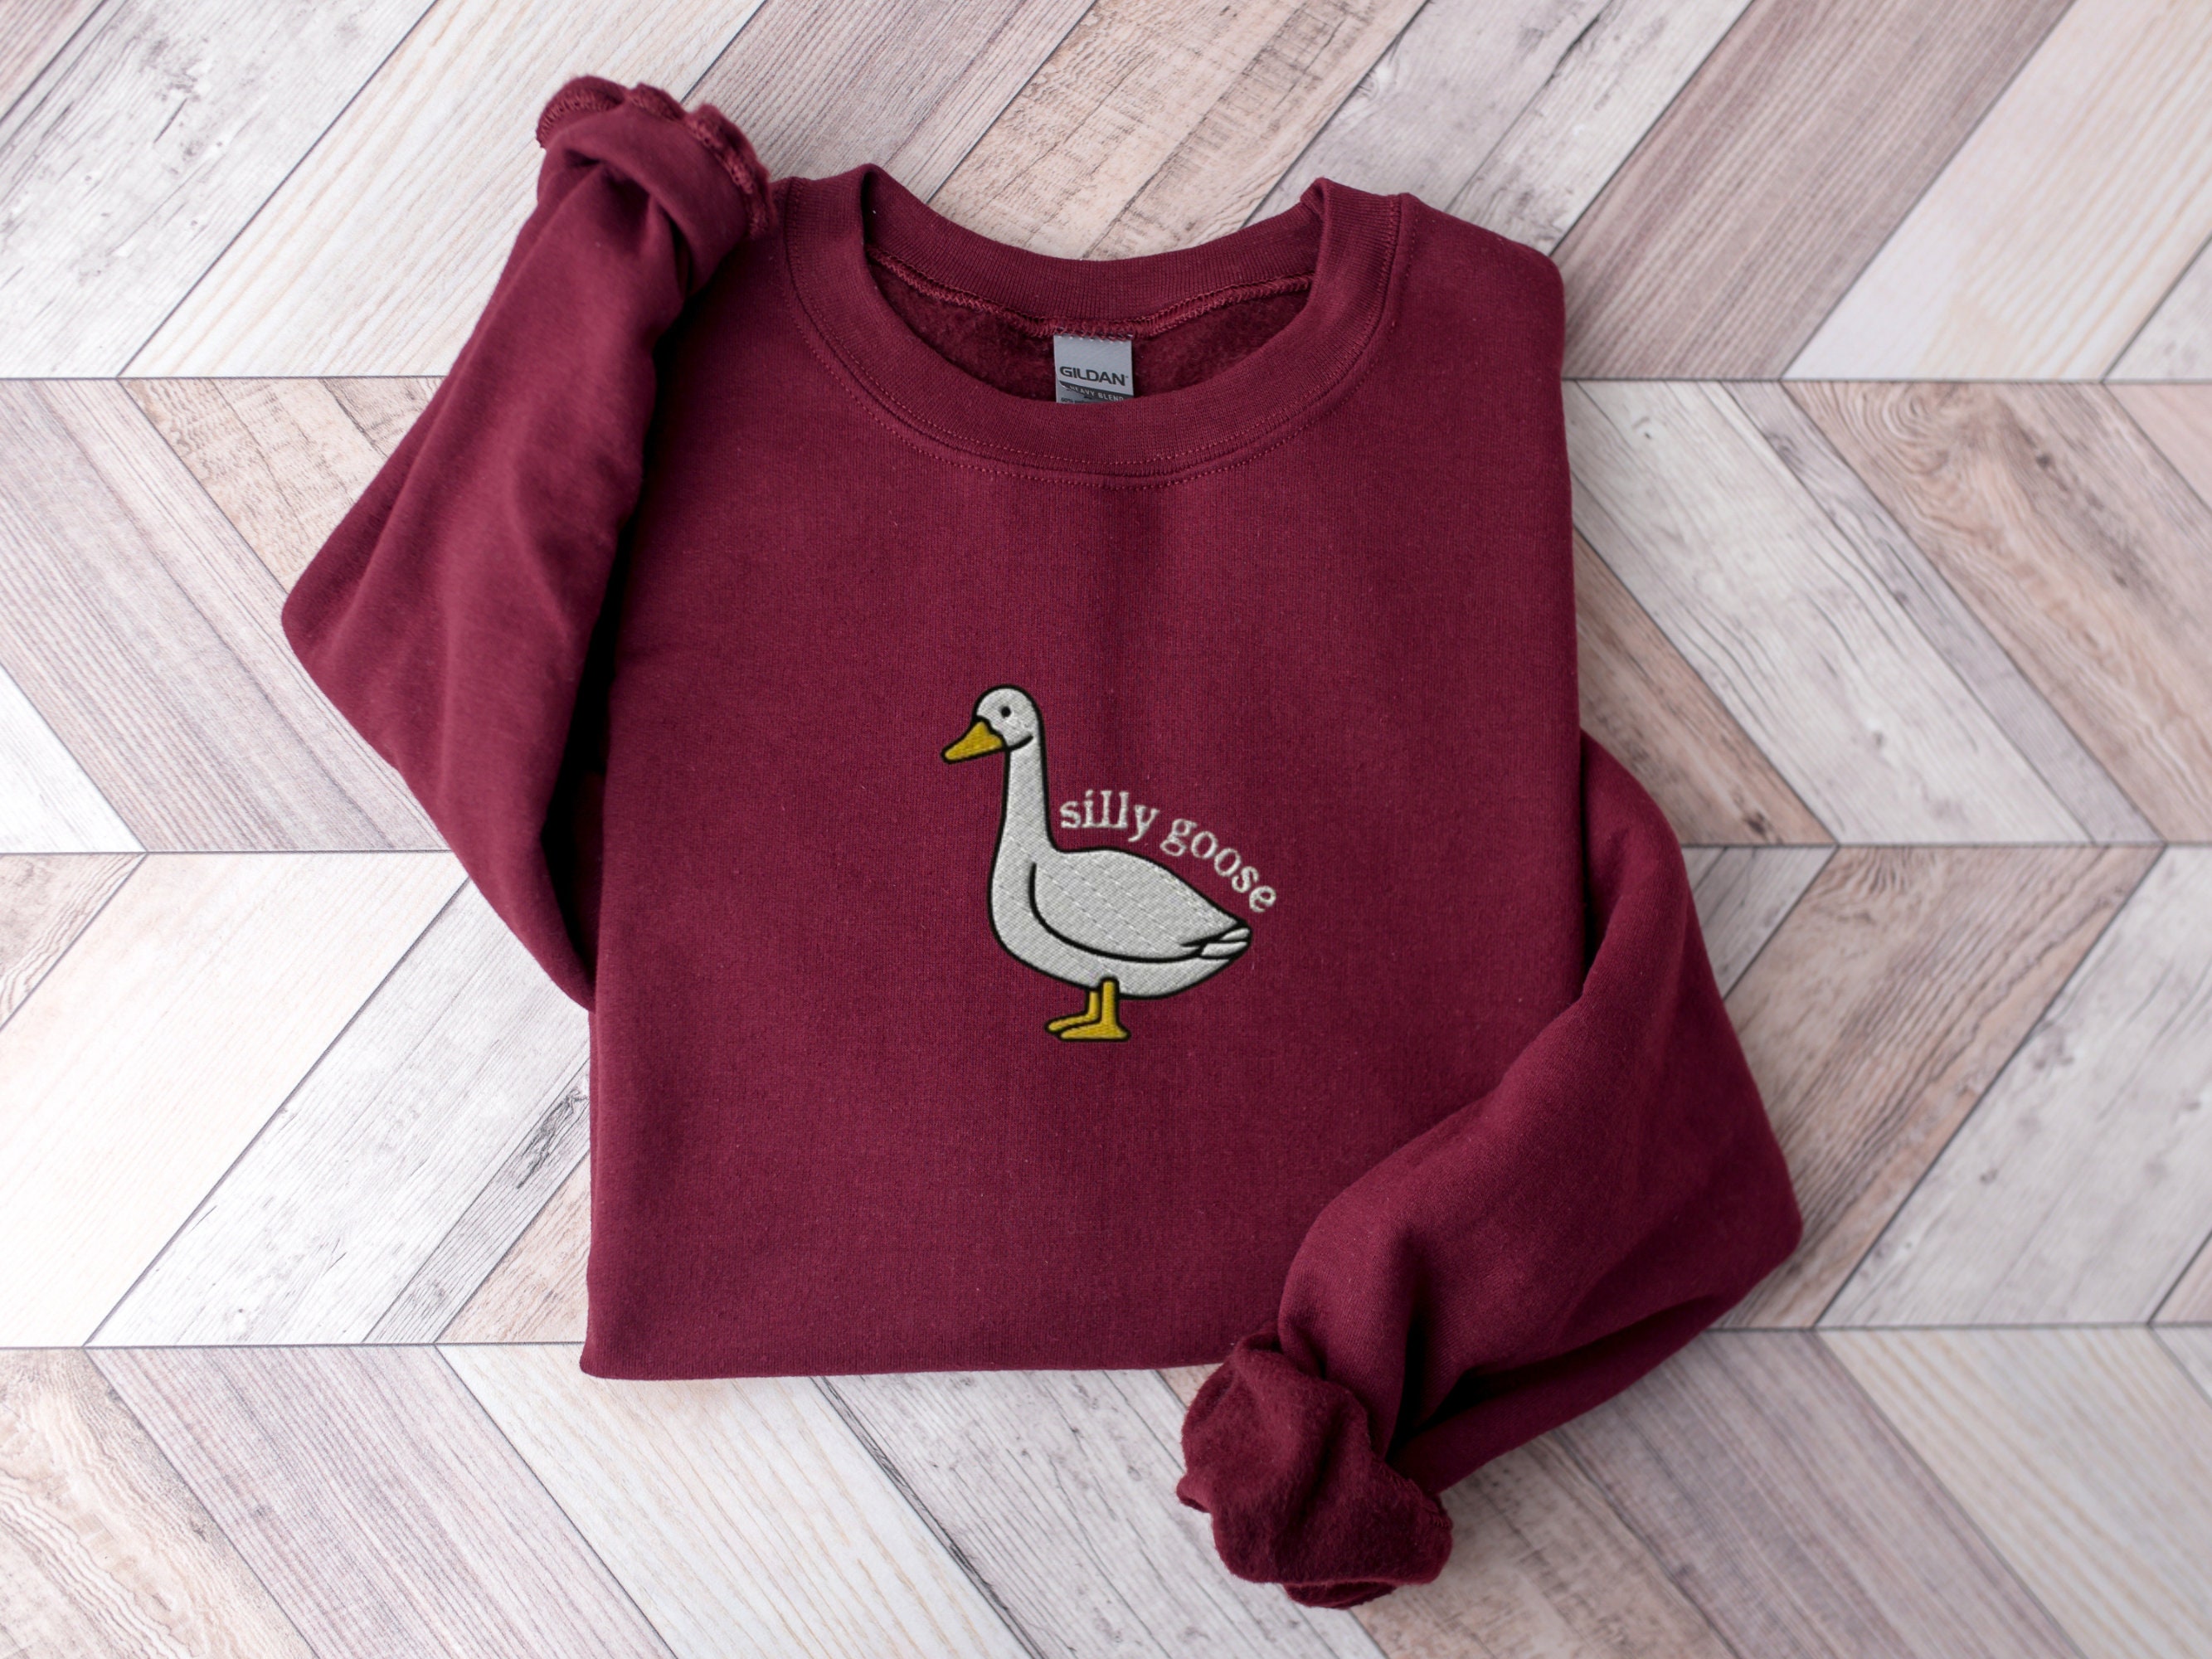 Discover Embroidered Silly Goose Sweatshirt, Embroidered Goose Crewneck Sweatshirt